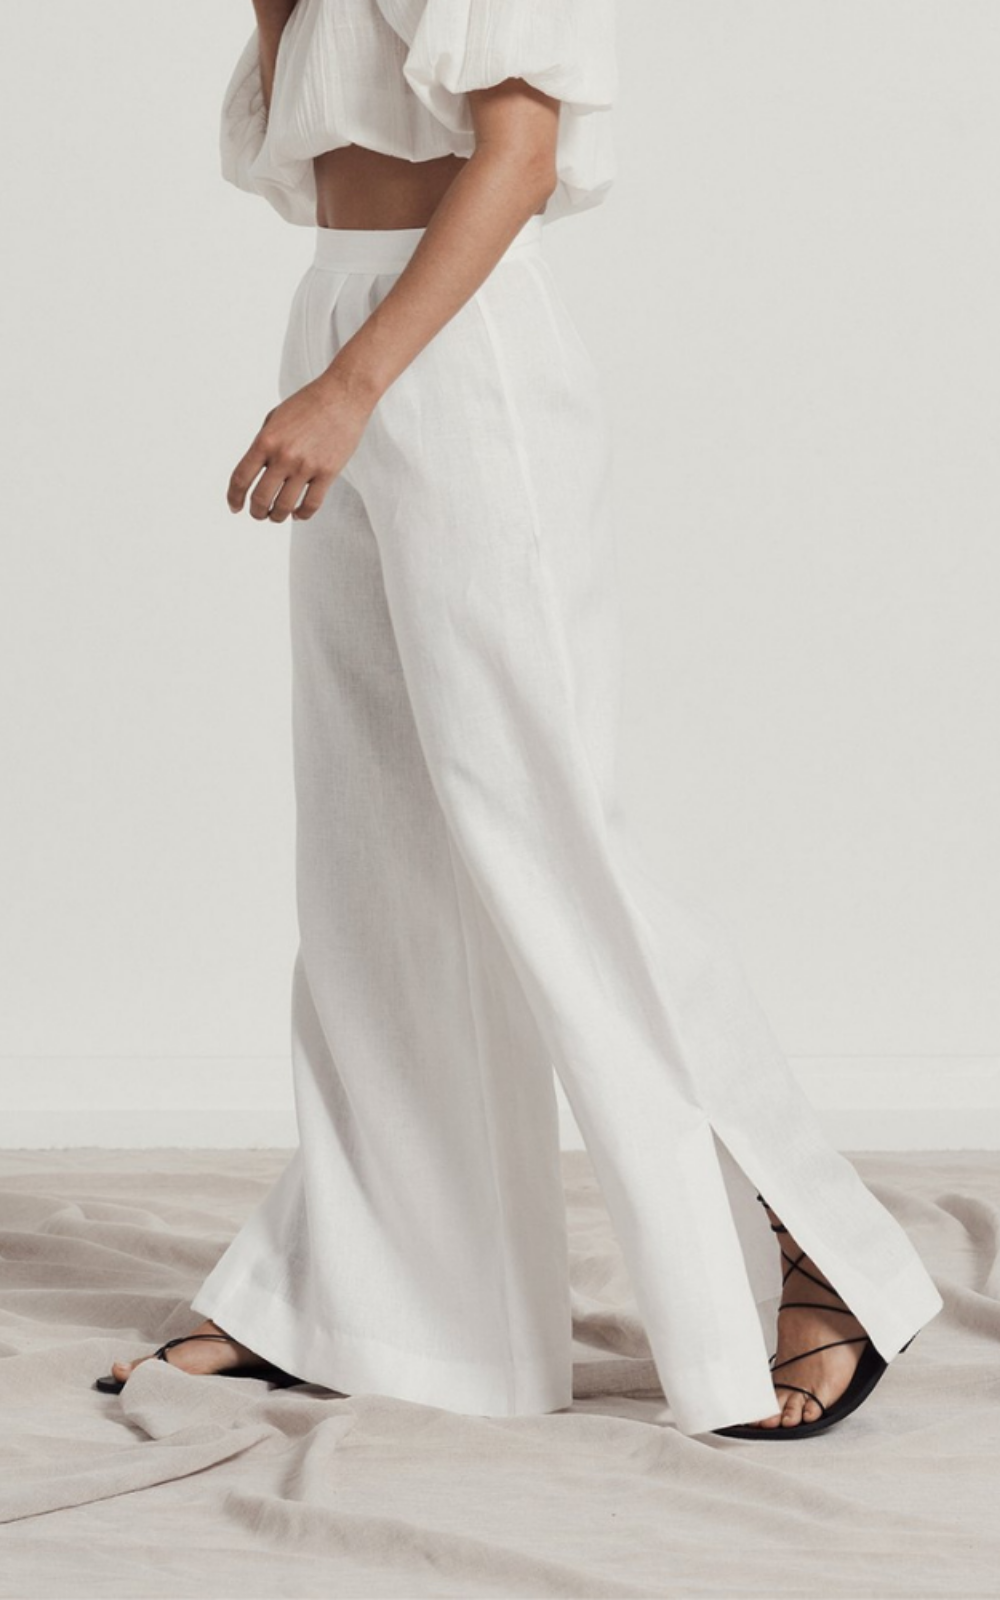 Chanel Flares - White